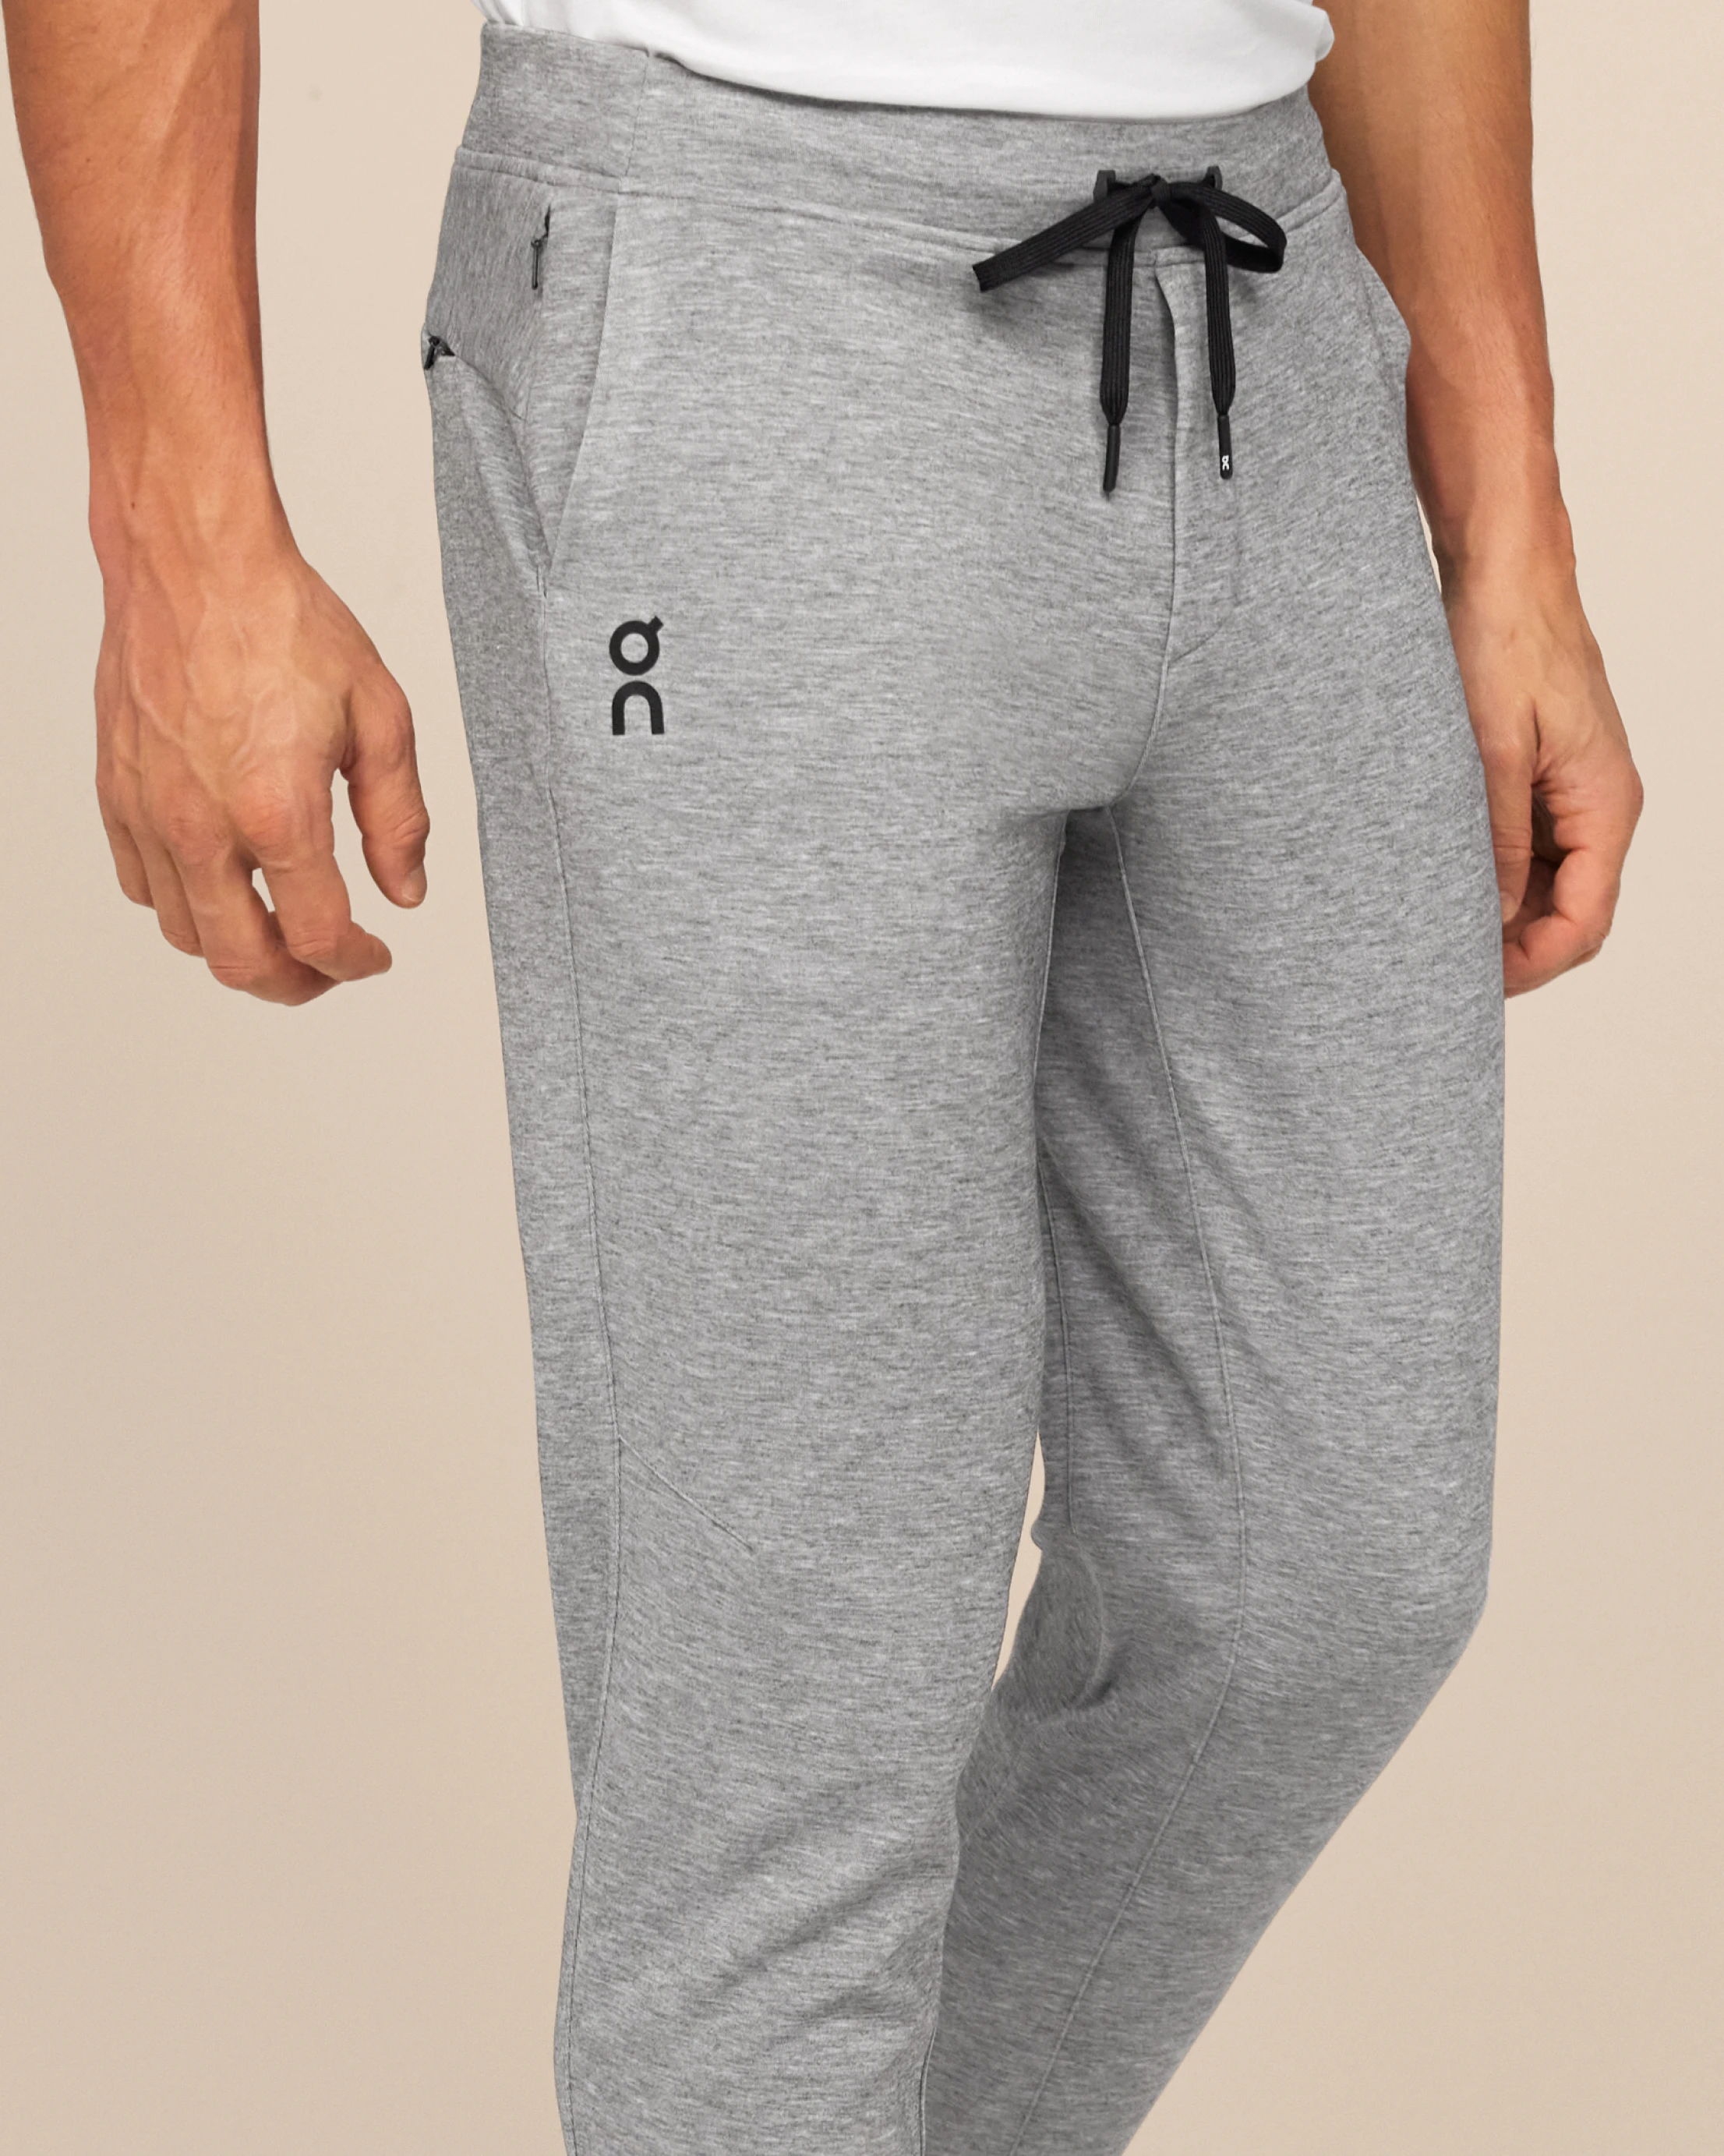 Oem Custom 100% Cotton Men's High Quality Casual Flared Jogger Track Pants  Elastic Waistband Men Stacked Sweatpants Men Trousers $2.6 - Wholesale  China Pants Man at Factory Prices from Dongyang Weiye Garment